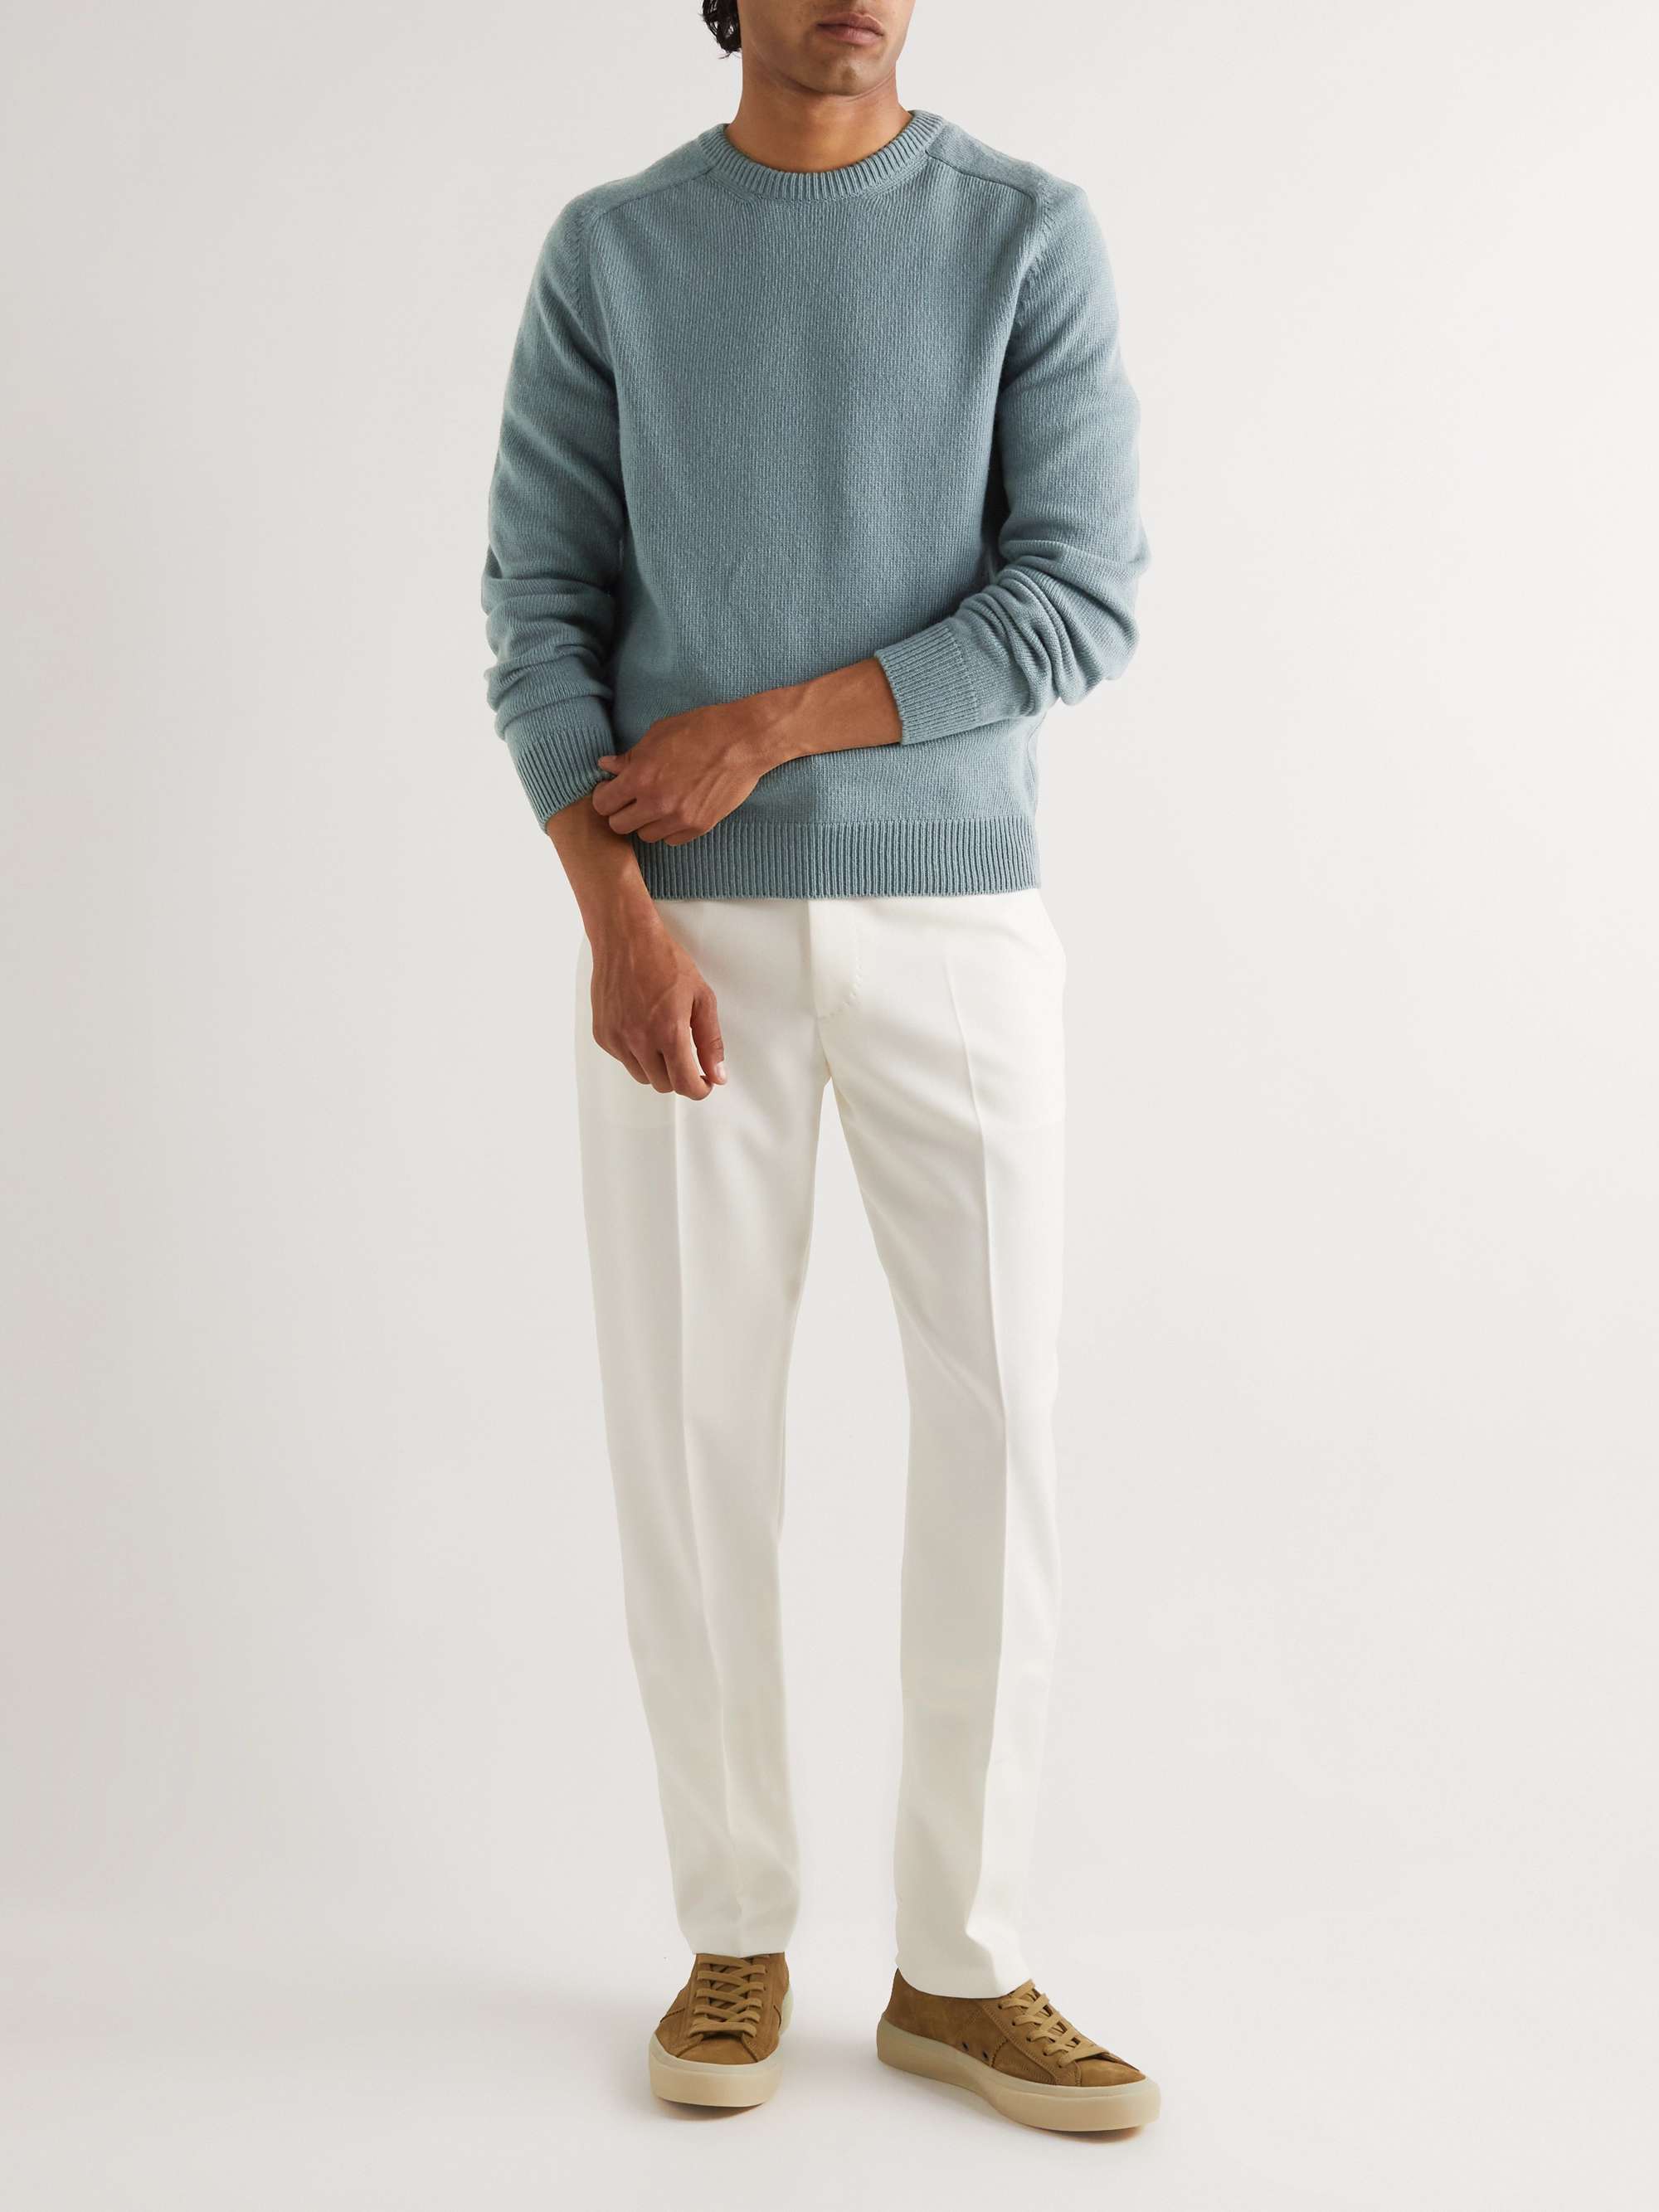 TOM FORD Cashmere Sweater